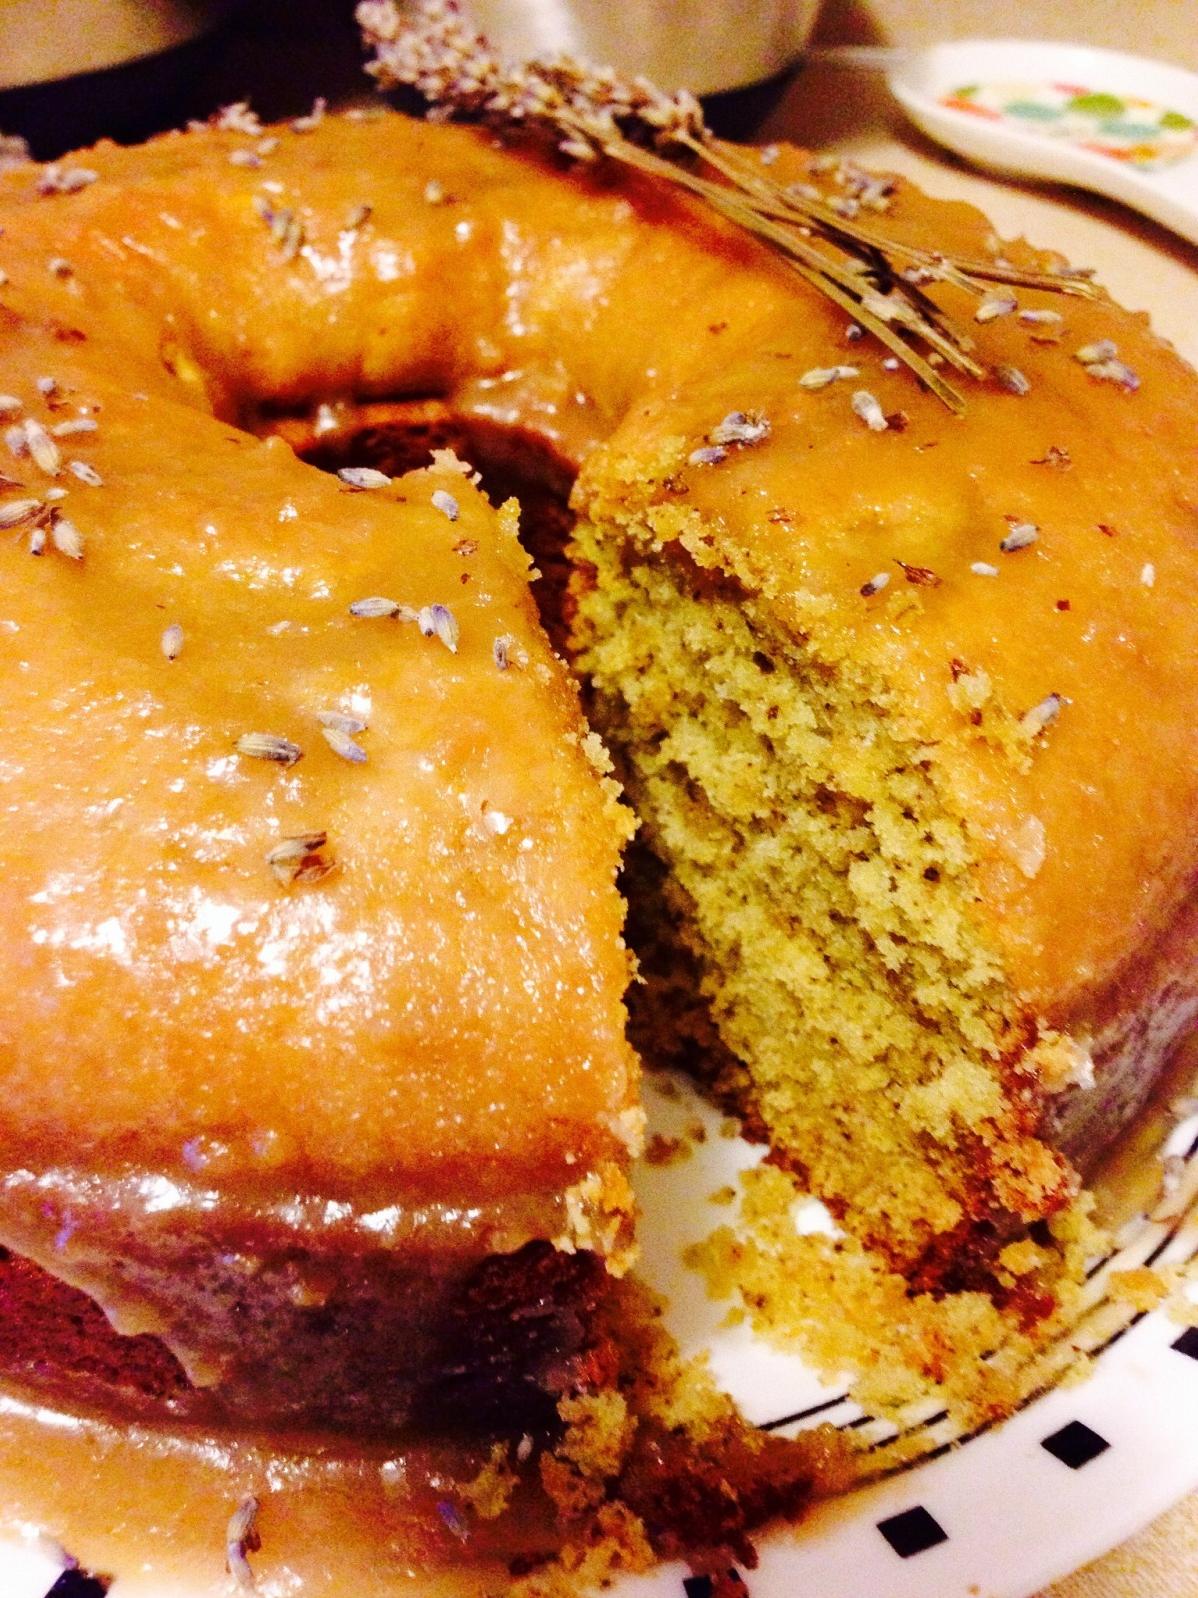  Nothing says summertime like a slice of this Garden Lavender Pound Cake.